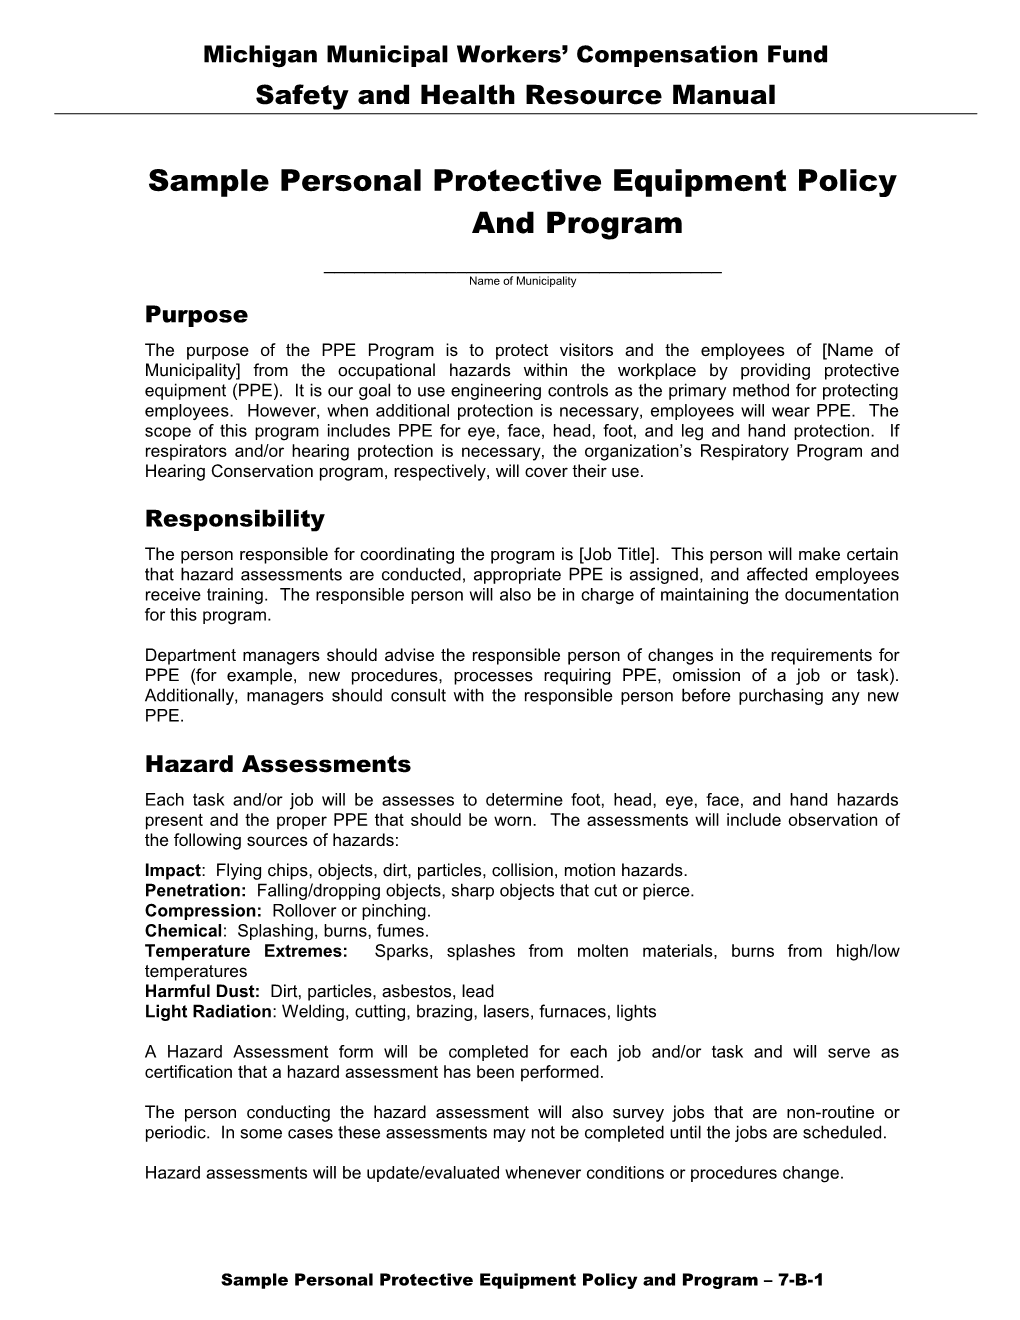 Sample Personal Protective Equipment Policy and Program